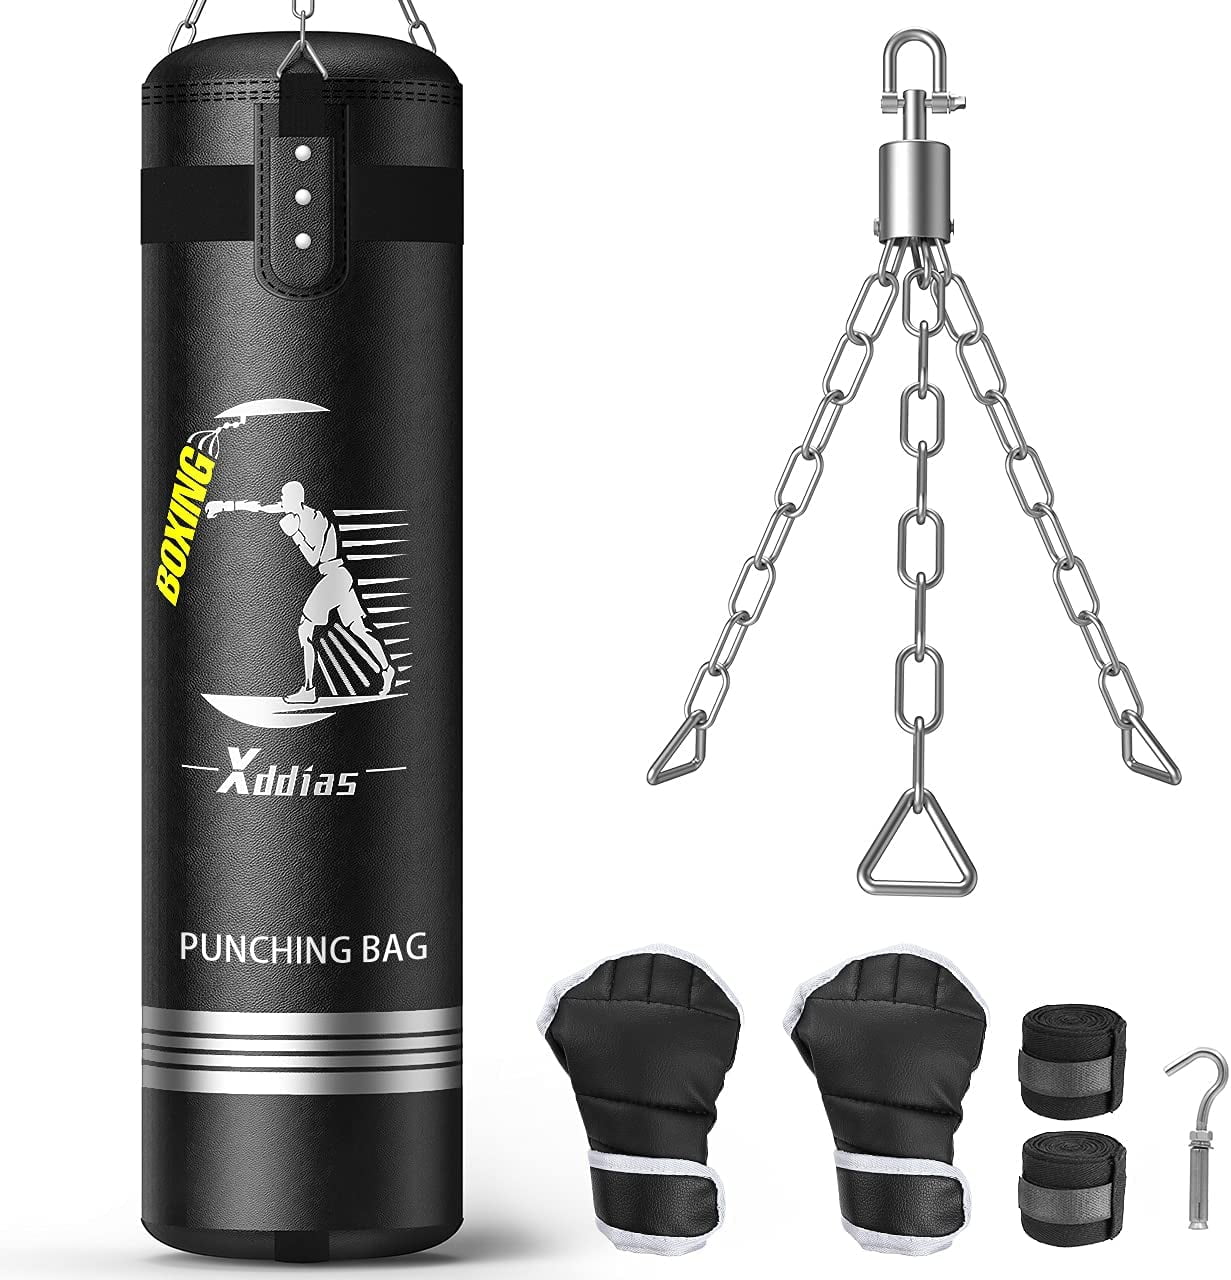 Punching Bags for Kids and Adult, Boxing Bag with Gloves， Foam Filled Hanging Boxing Bag, Kickboxing Bag with Steel Chain for Workout Karate Muay Thai MMA